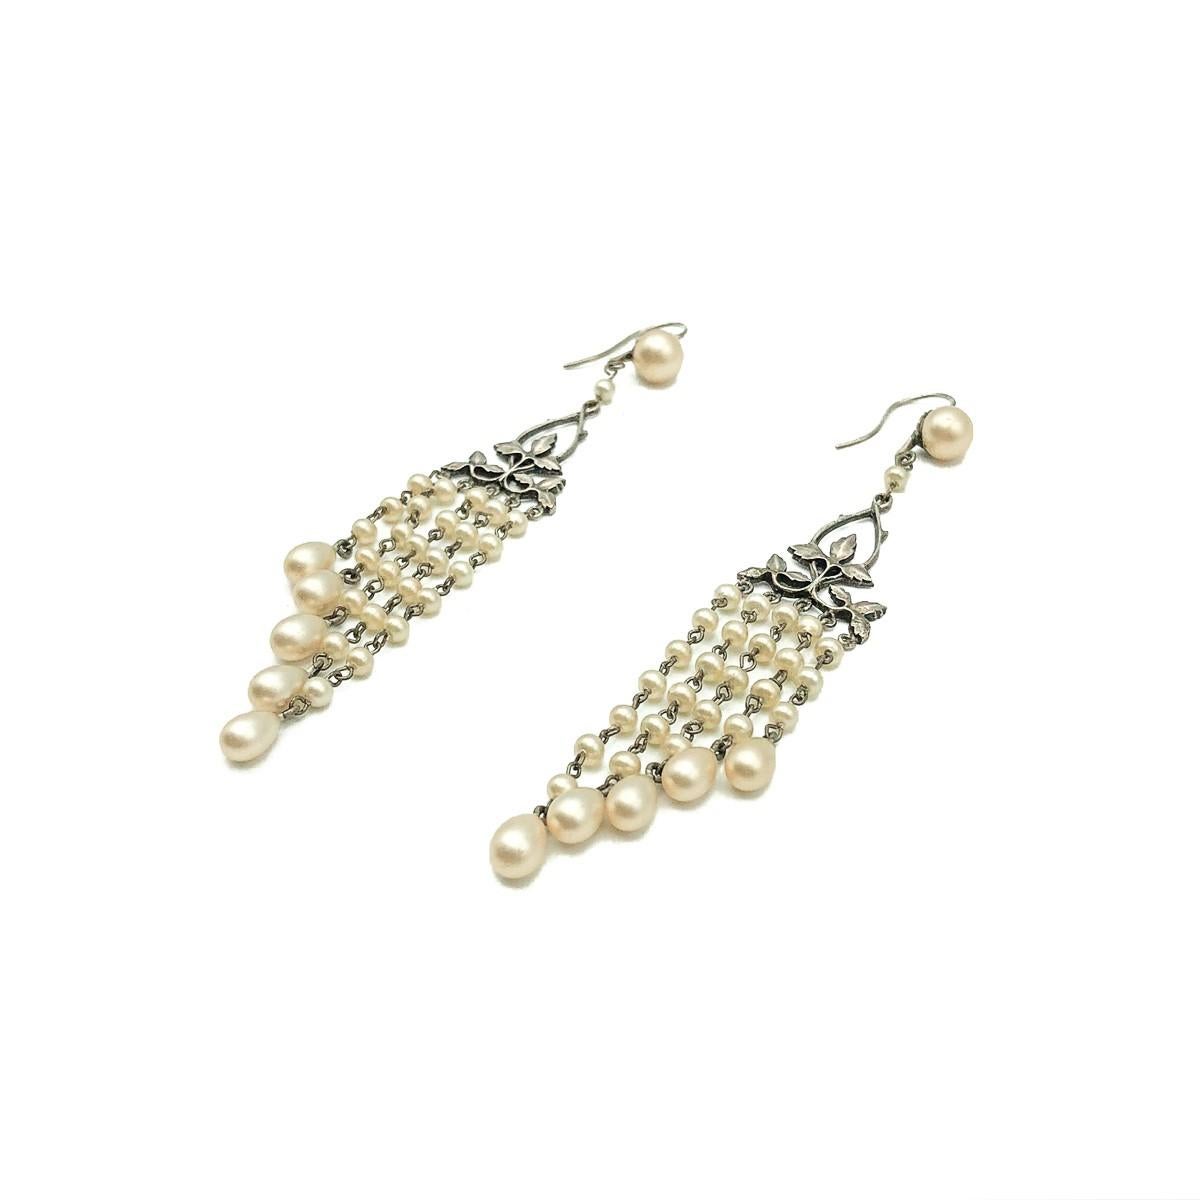 Antique Pearl Droplet Earrings 1920s In Good Condition For Sale In Wilmslow, GB